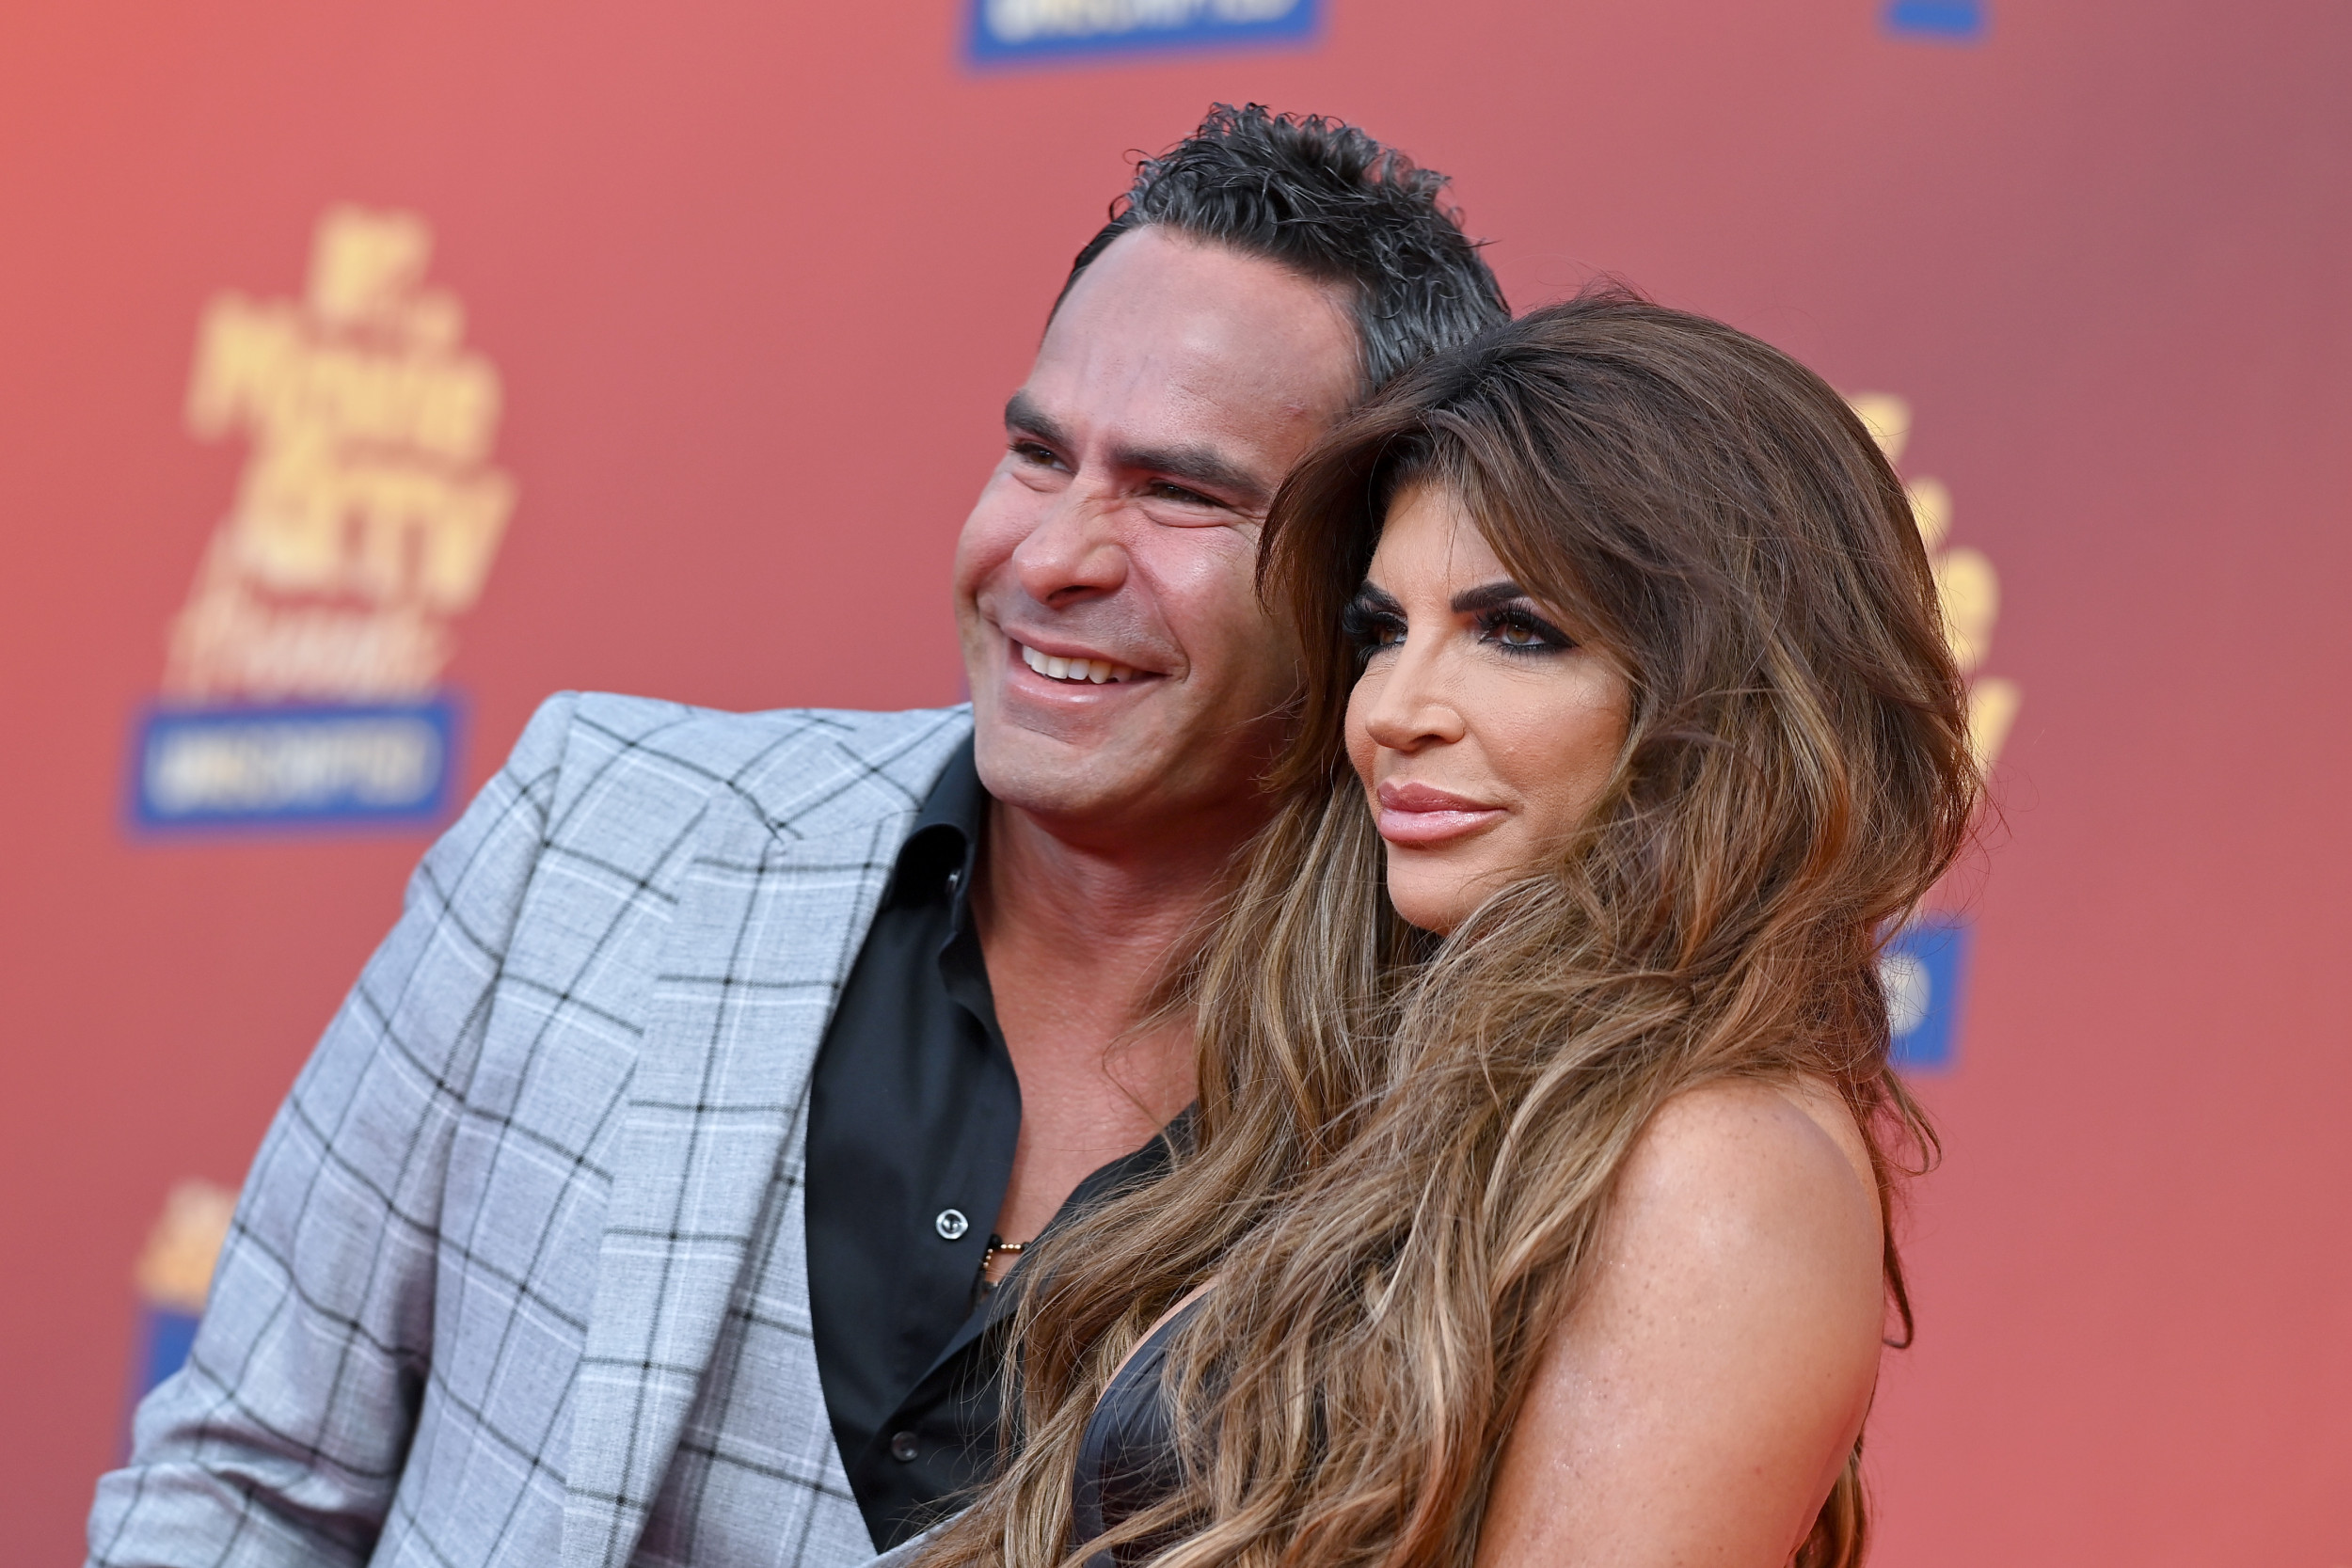 RHONJ Star Teresa Giudice Details Hot Sex Life With Luis in NSFW Chat